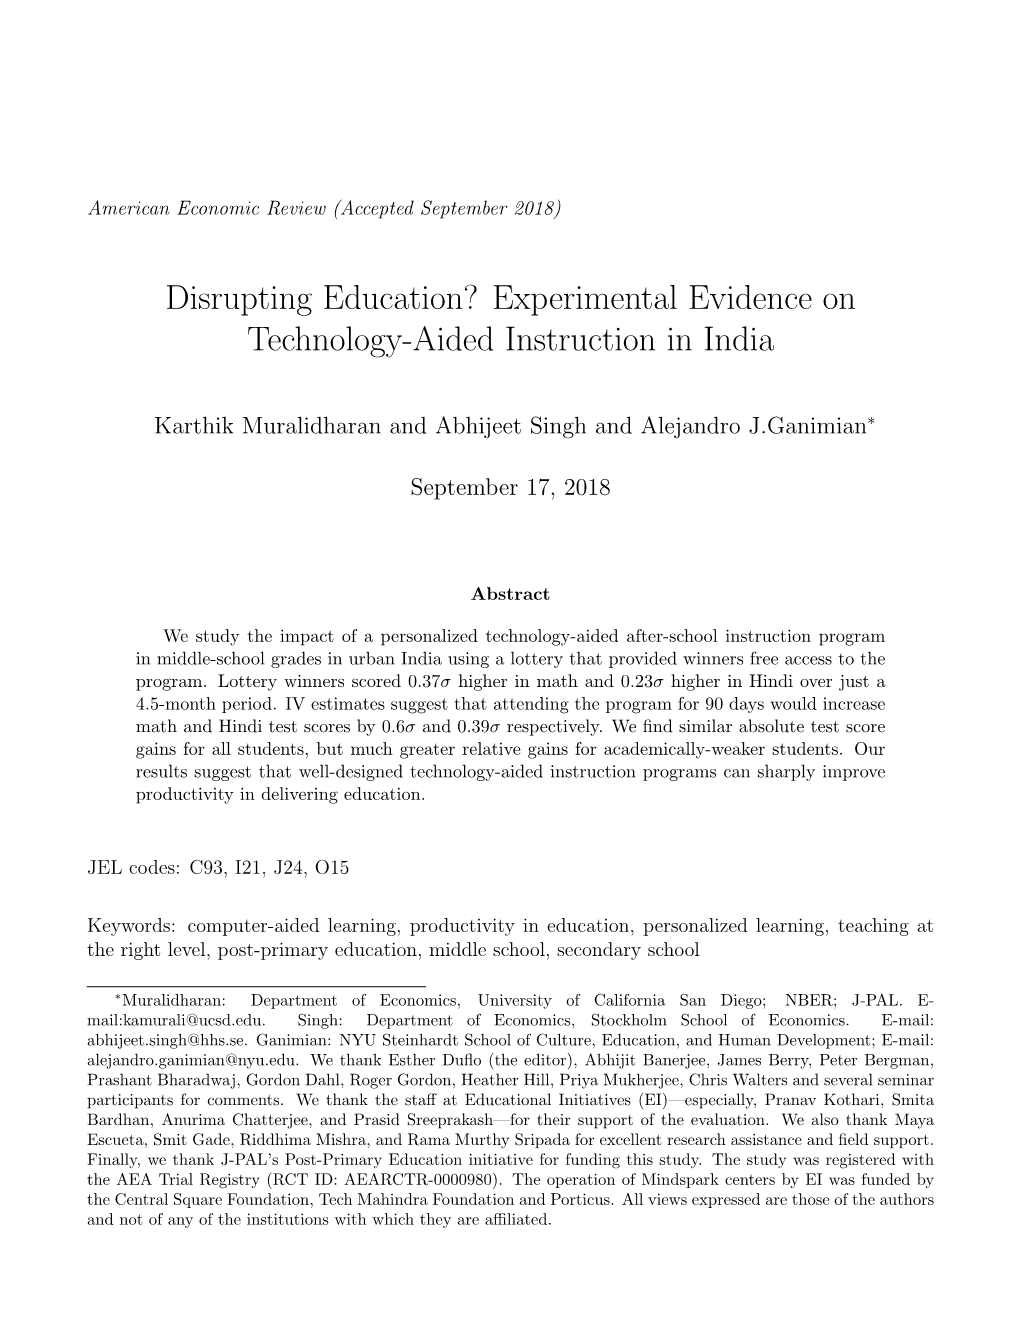 Disrupting Education? Experimental Evidence on Technology-Aided Instruction in India